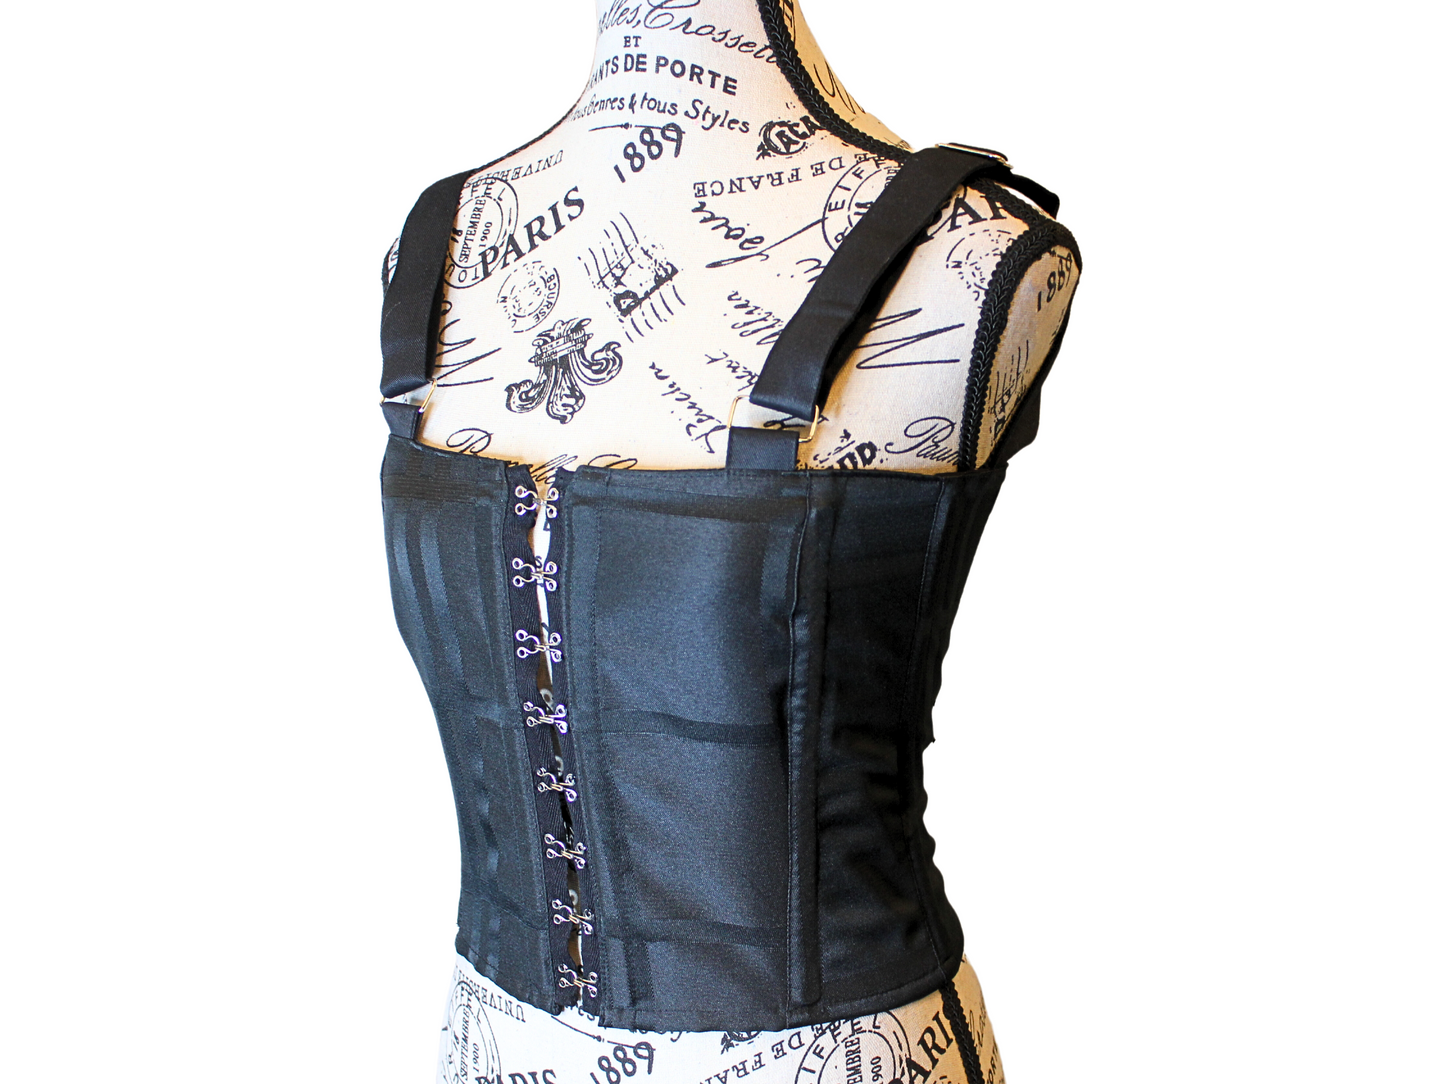 The VM Clip Corset with Straps